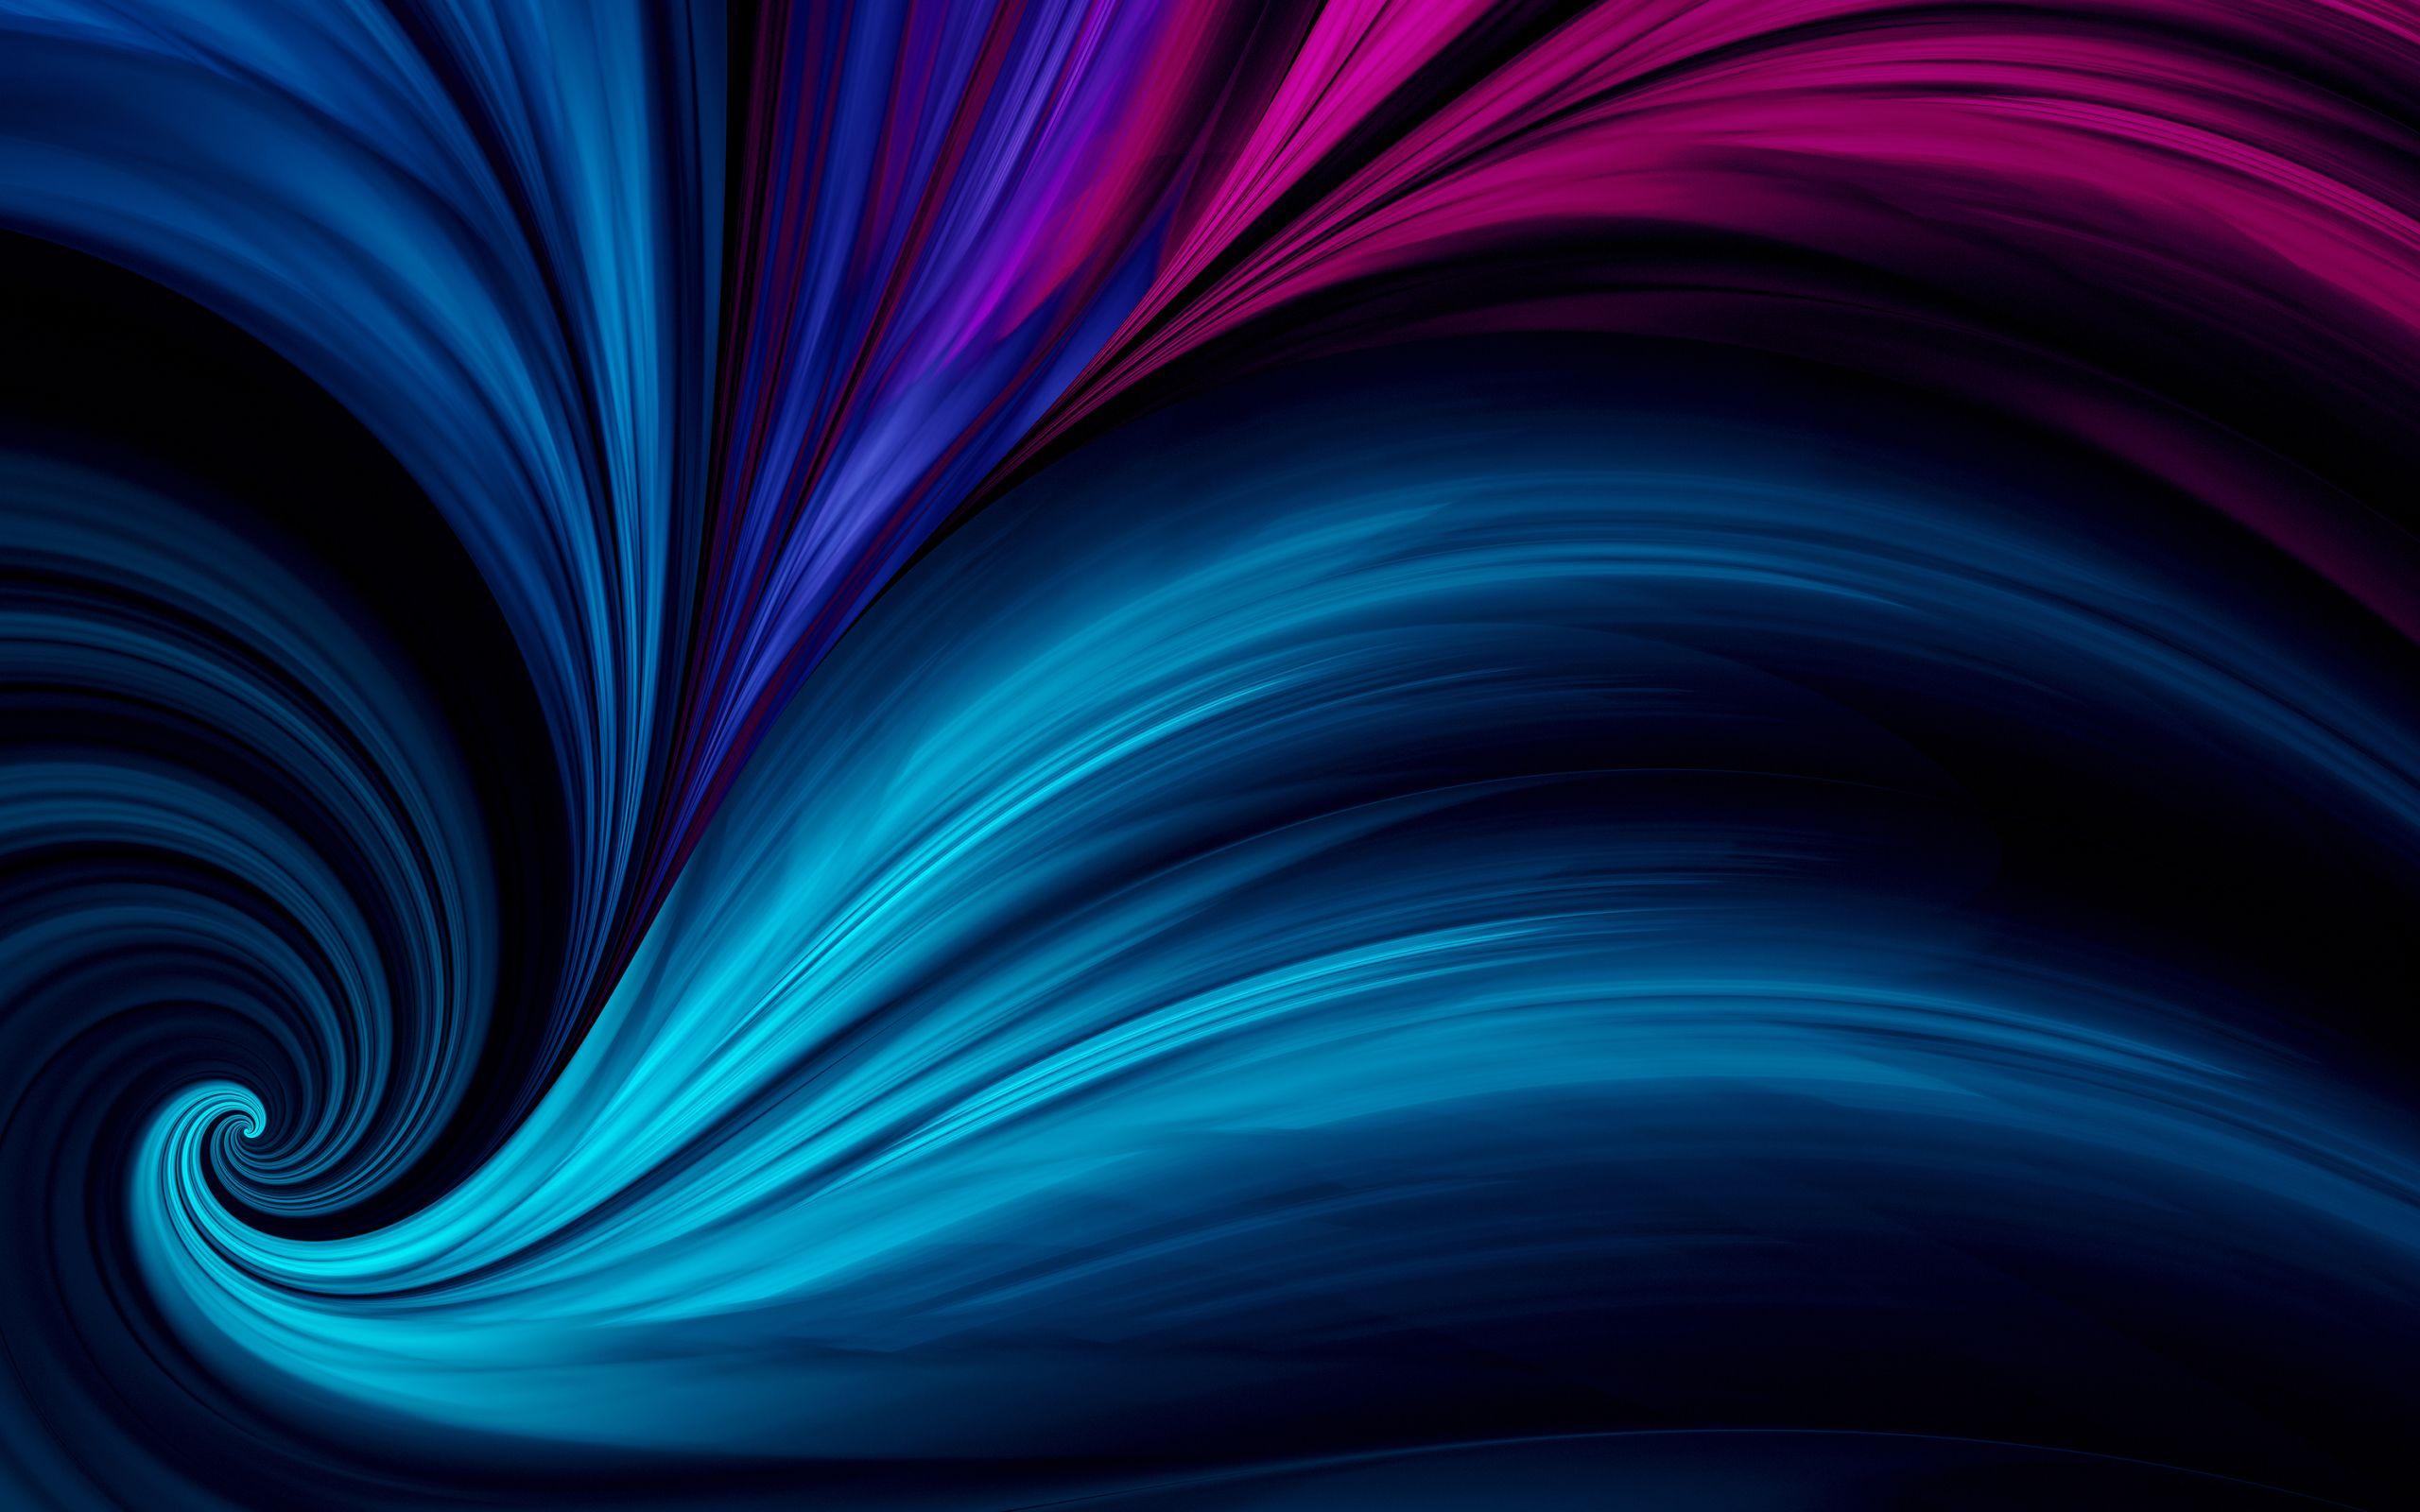 Abstract Swirl Wallpapers Top Free Abstract Swirl Backgrounds